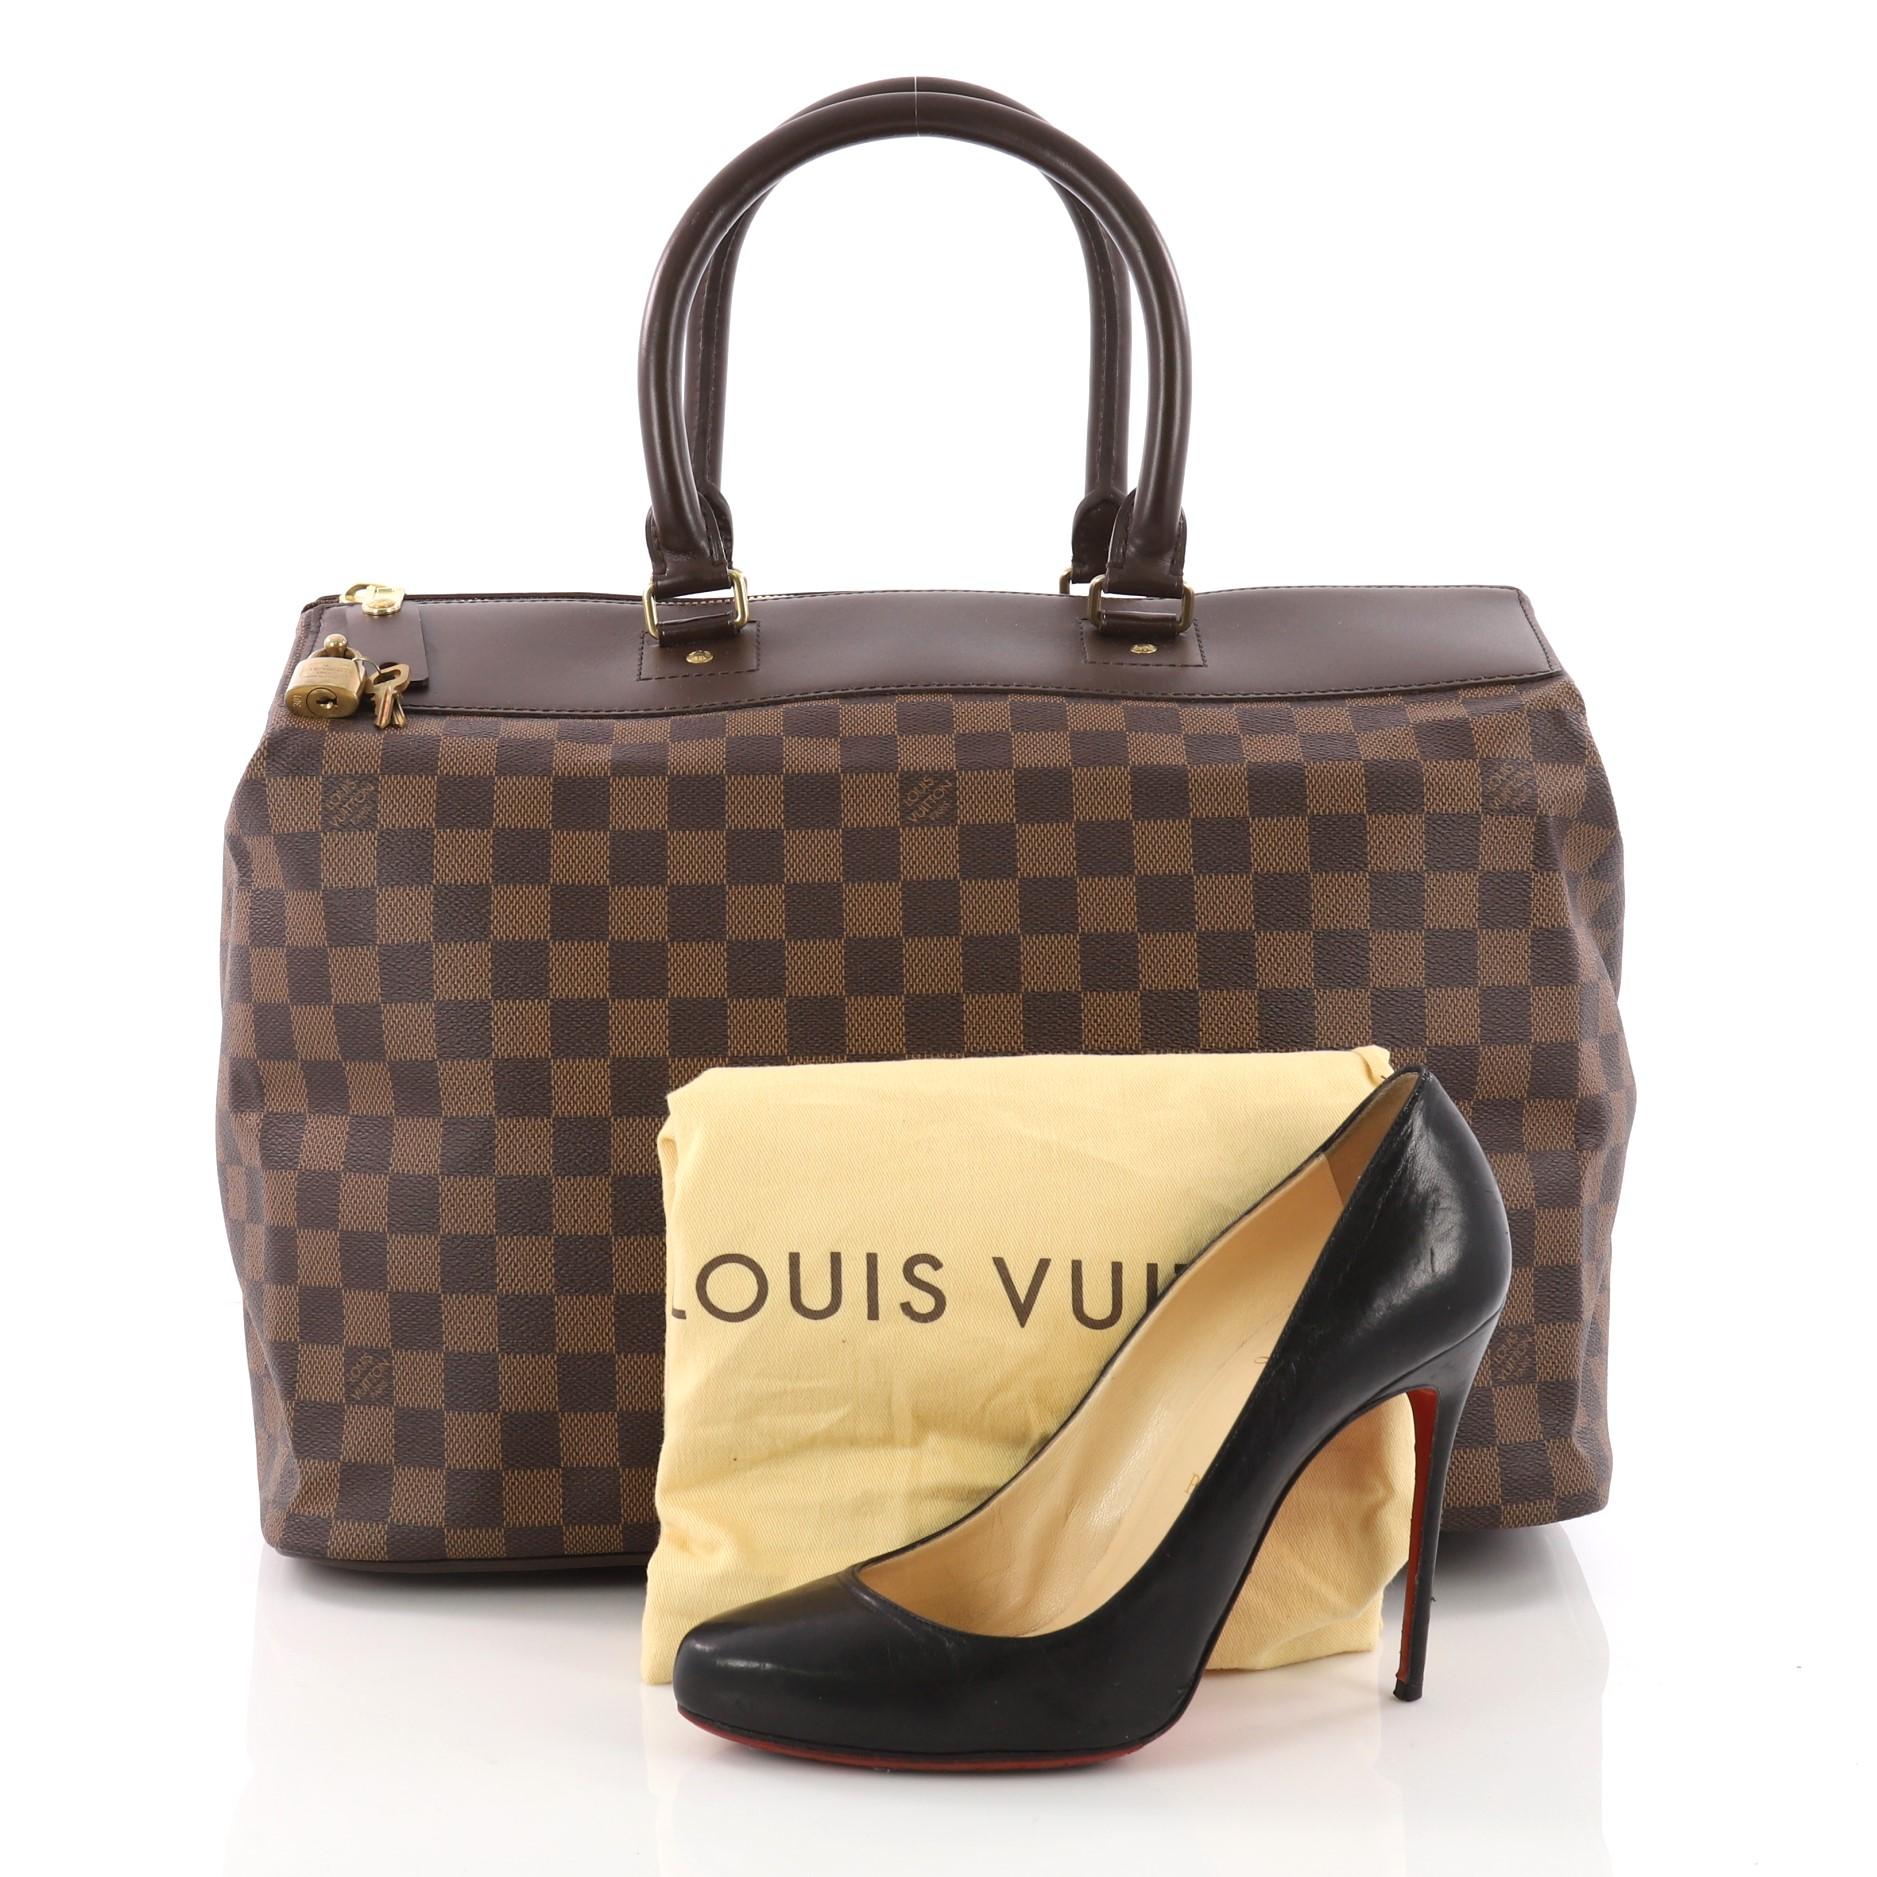 This authentic Louis Vuitton Greenwich Travel Bag Damier PM is perfect for weekend getaways. Crafted in damier ebene coated canvas, this handbag features dual-rolled handles, brown leather trims and gold-tone hardware accents. Its top zip closure